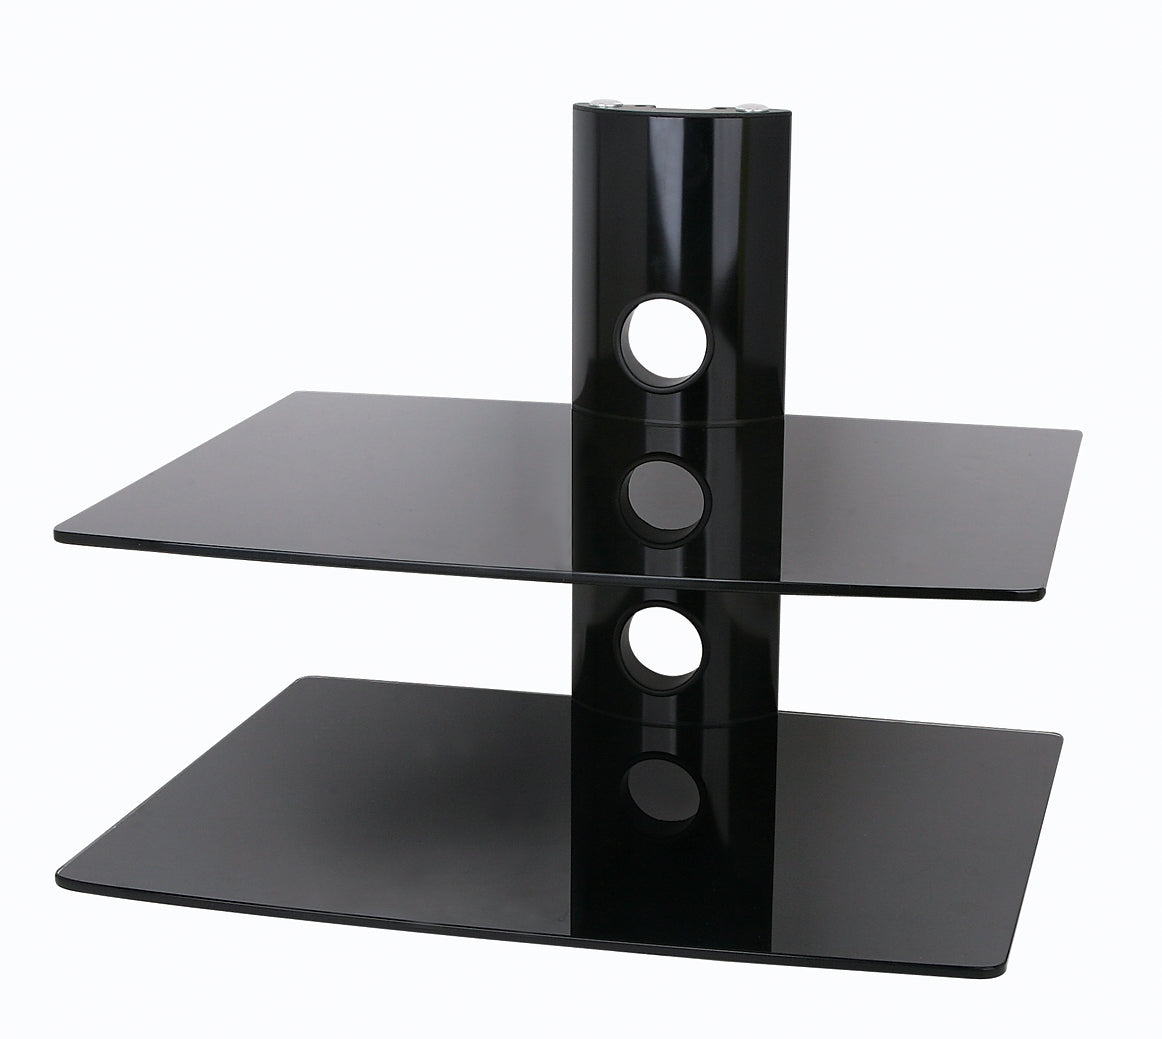 64-4052 Double Glass Shelf Unit for Wall Mounting DVD / Receiver